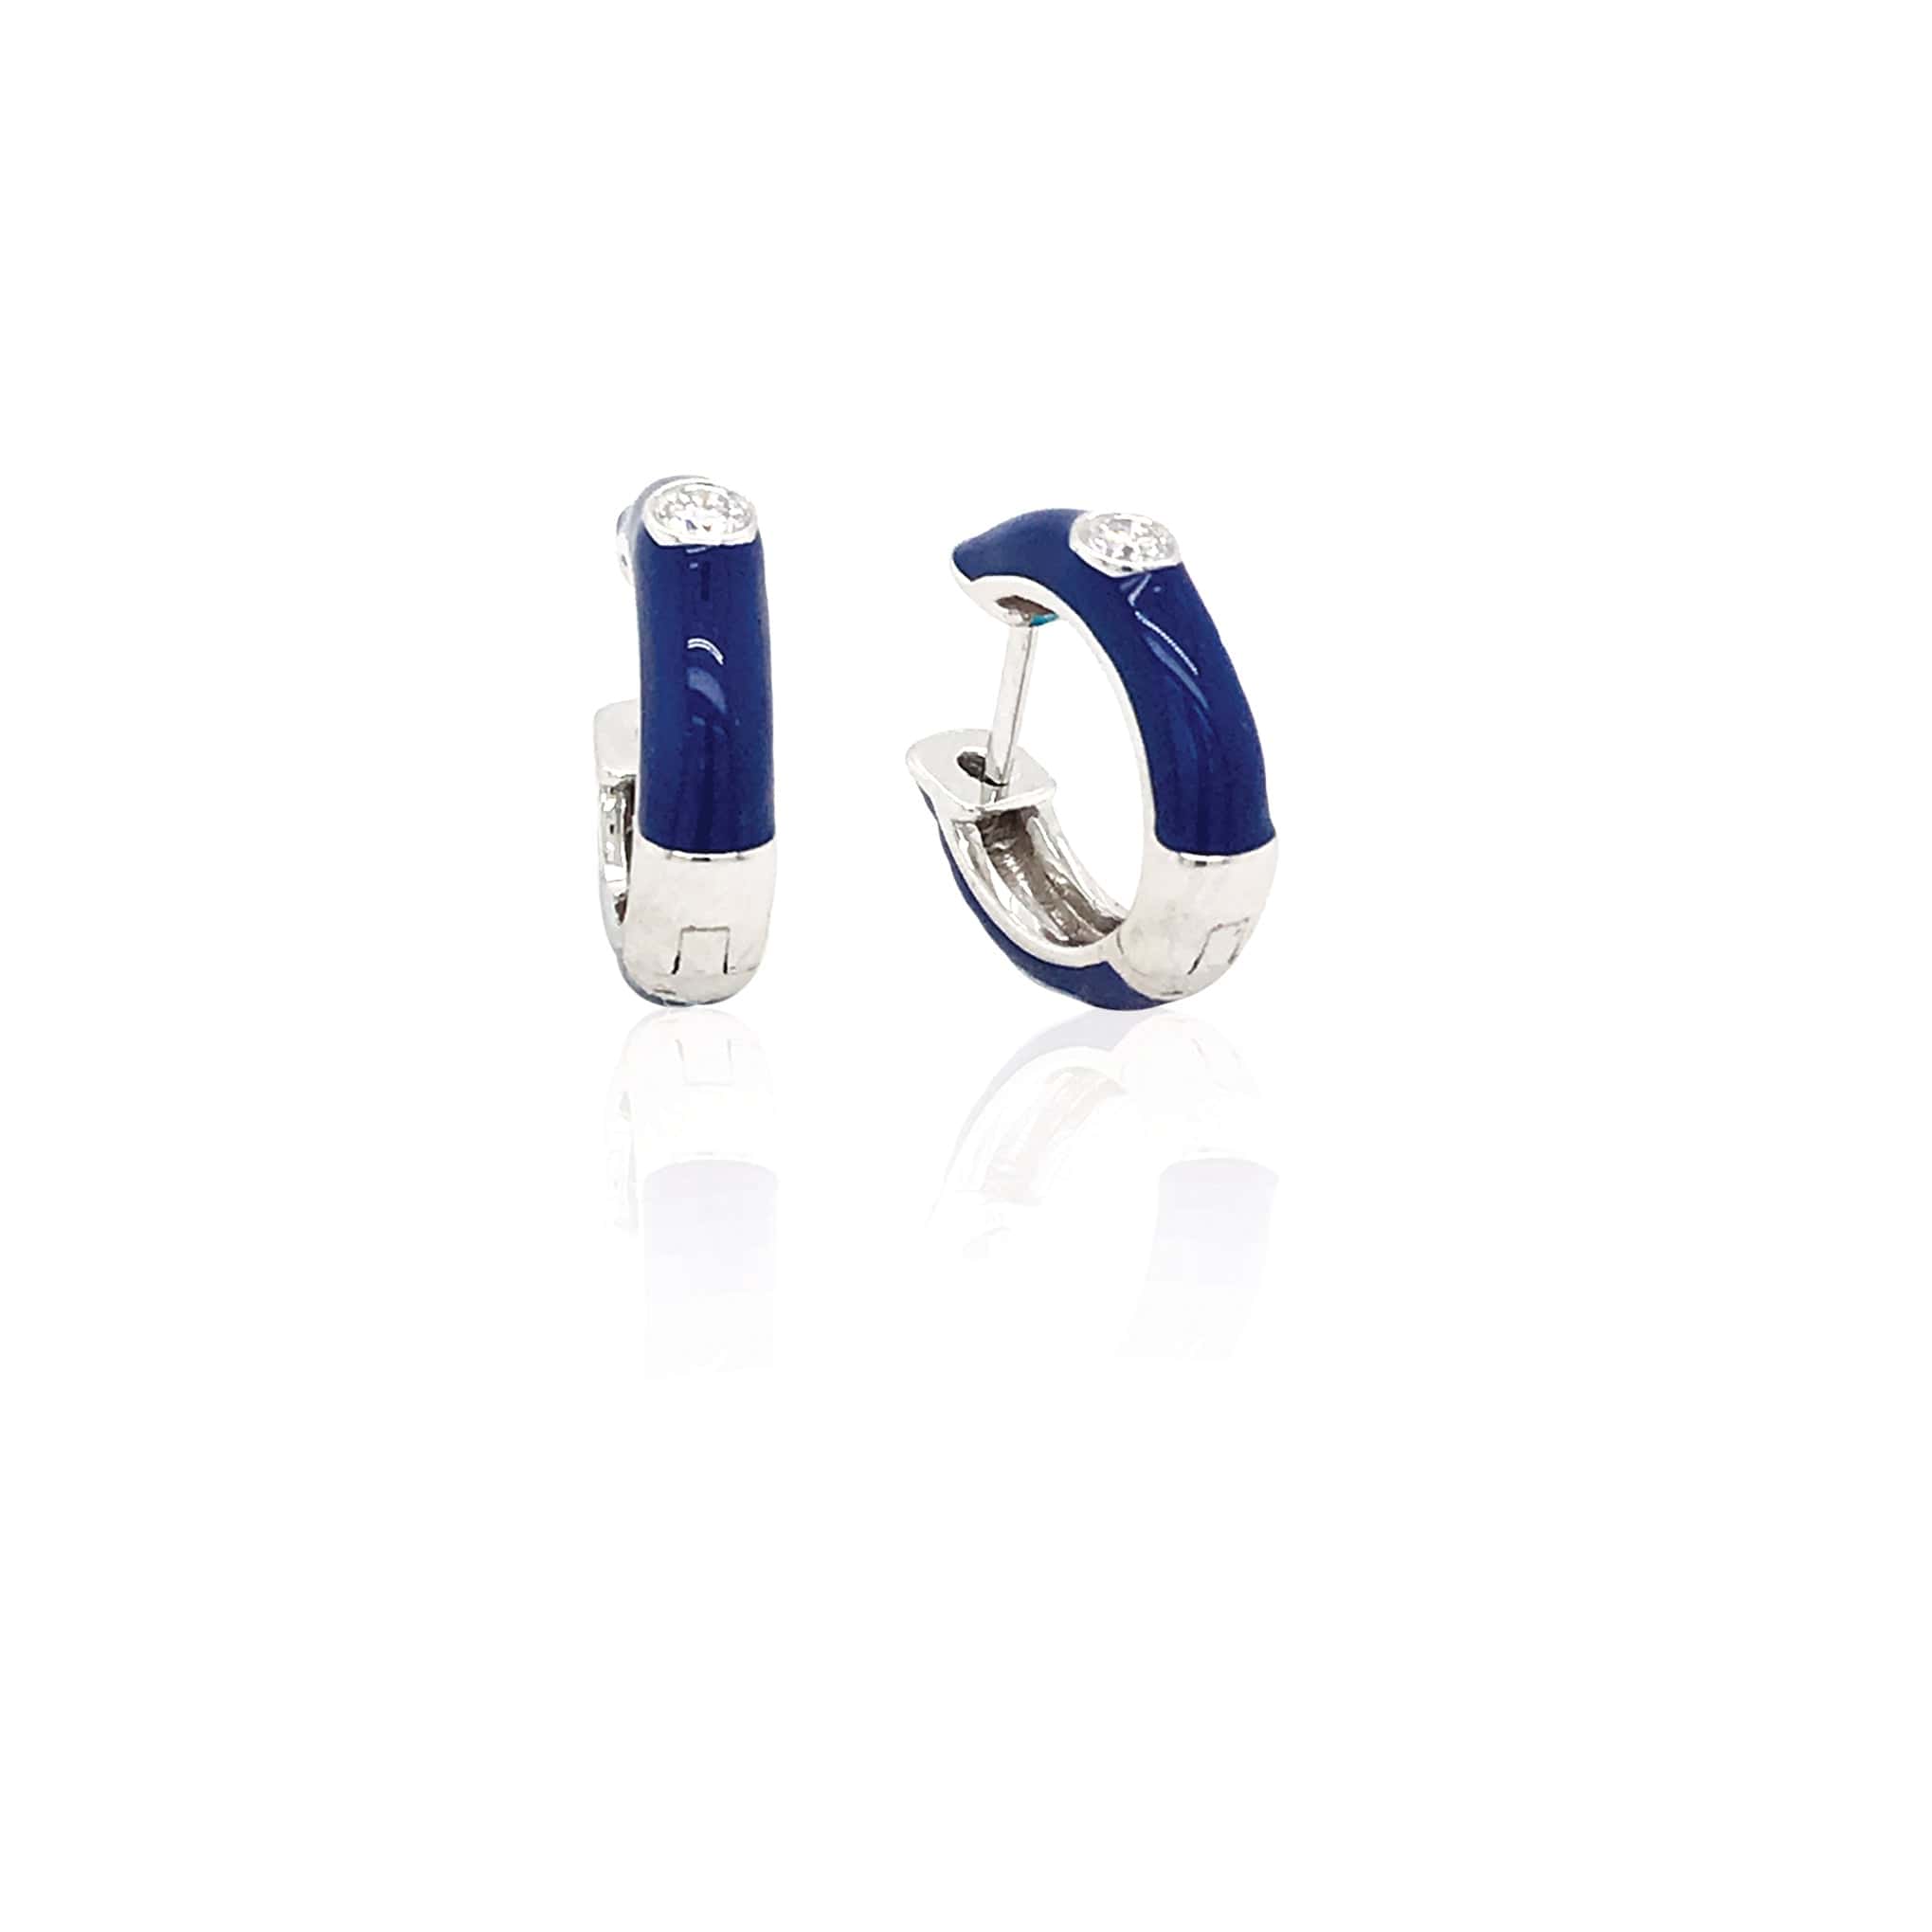 M.Fitaihi Candy - Gold Royal Blue Earrings With Diamond - M.Fitaihi